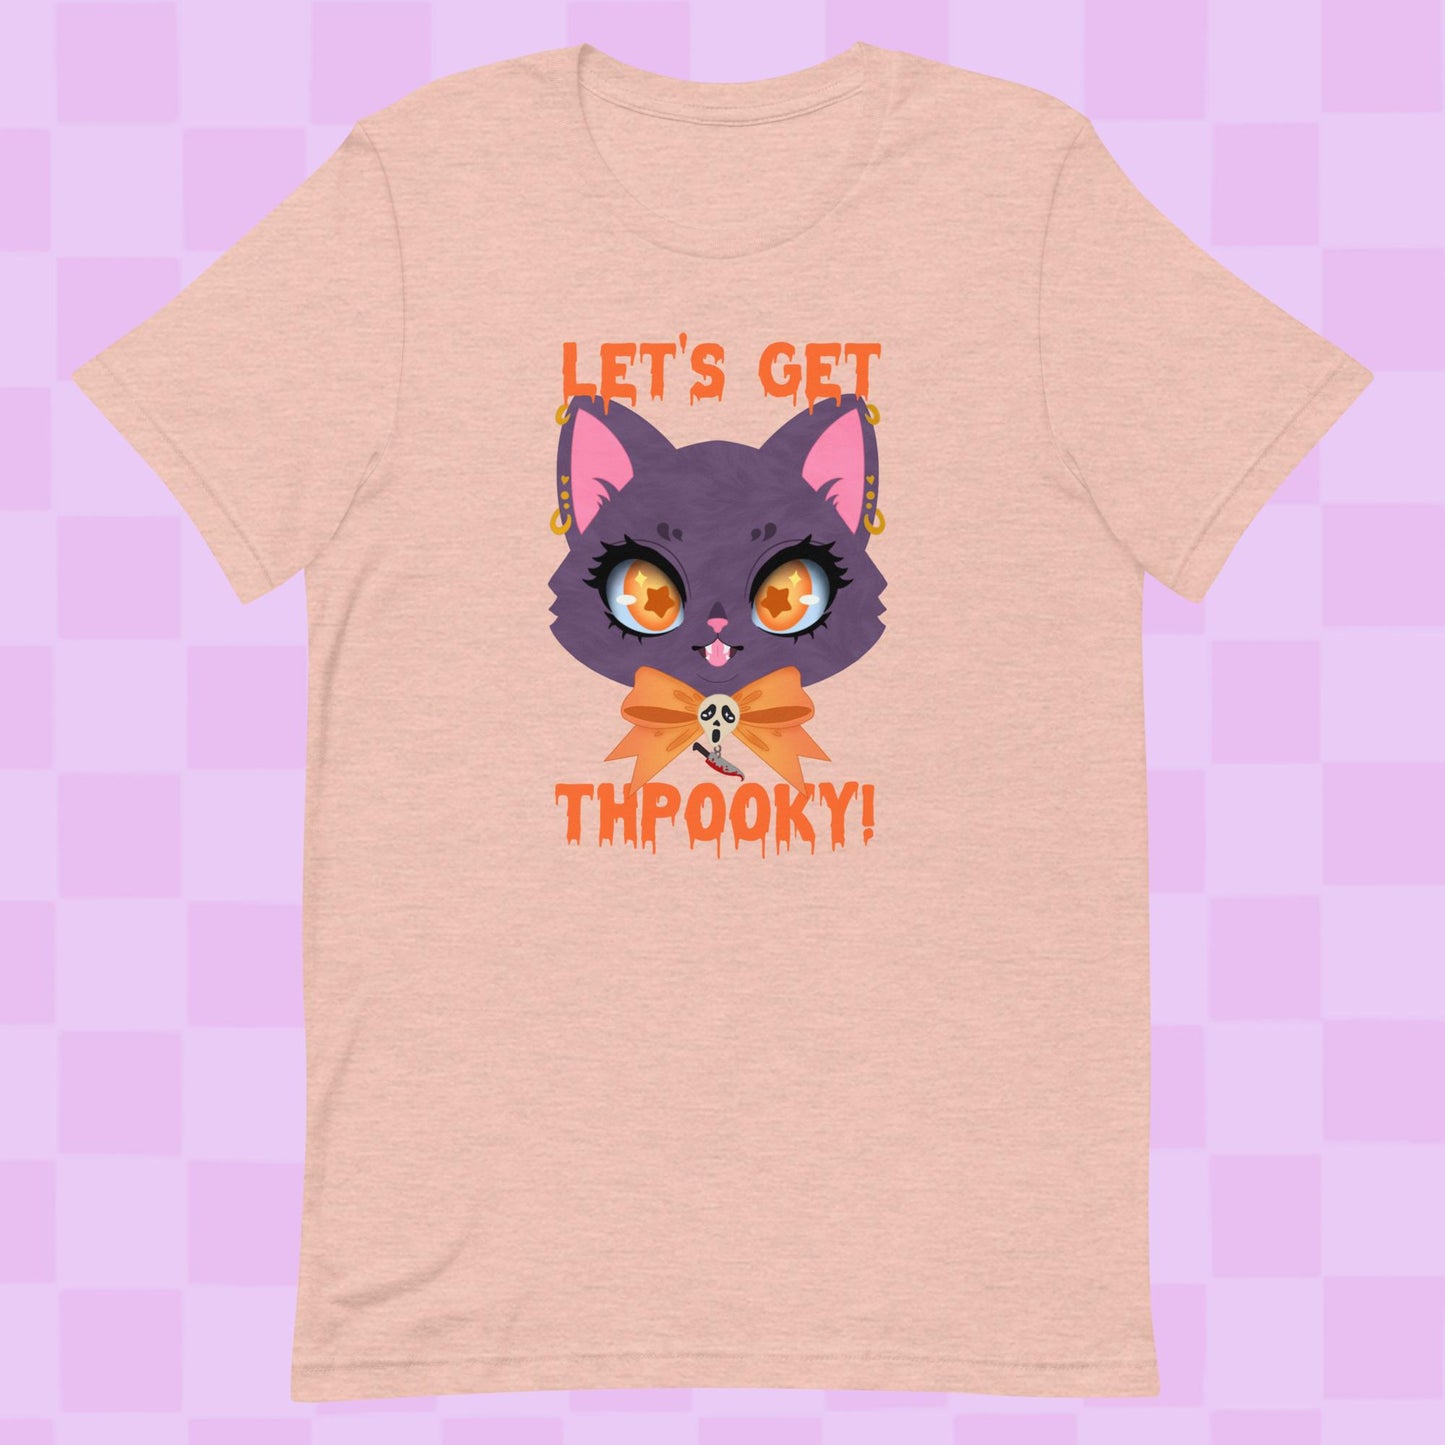 Lets get thpooky unisex t-shirt